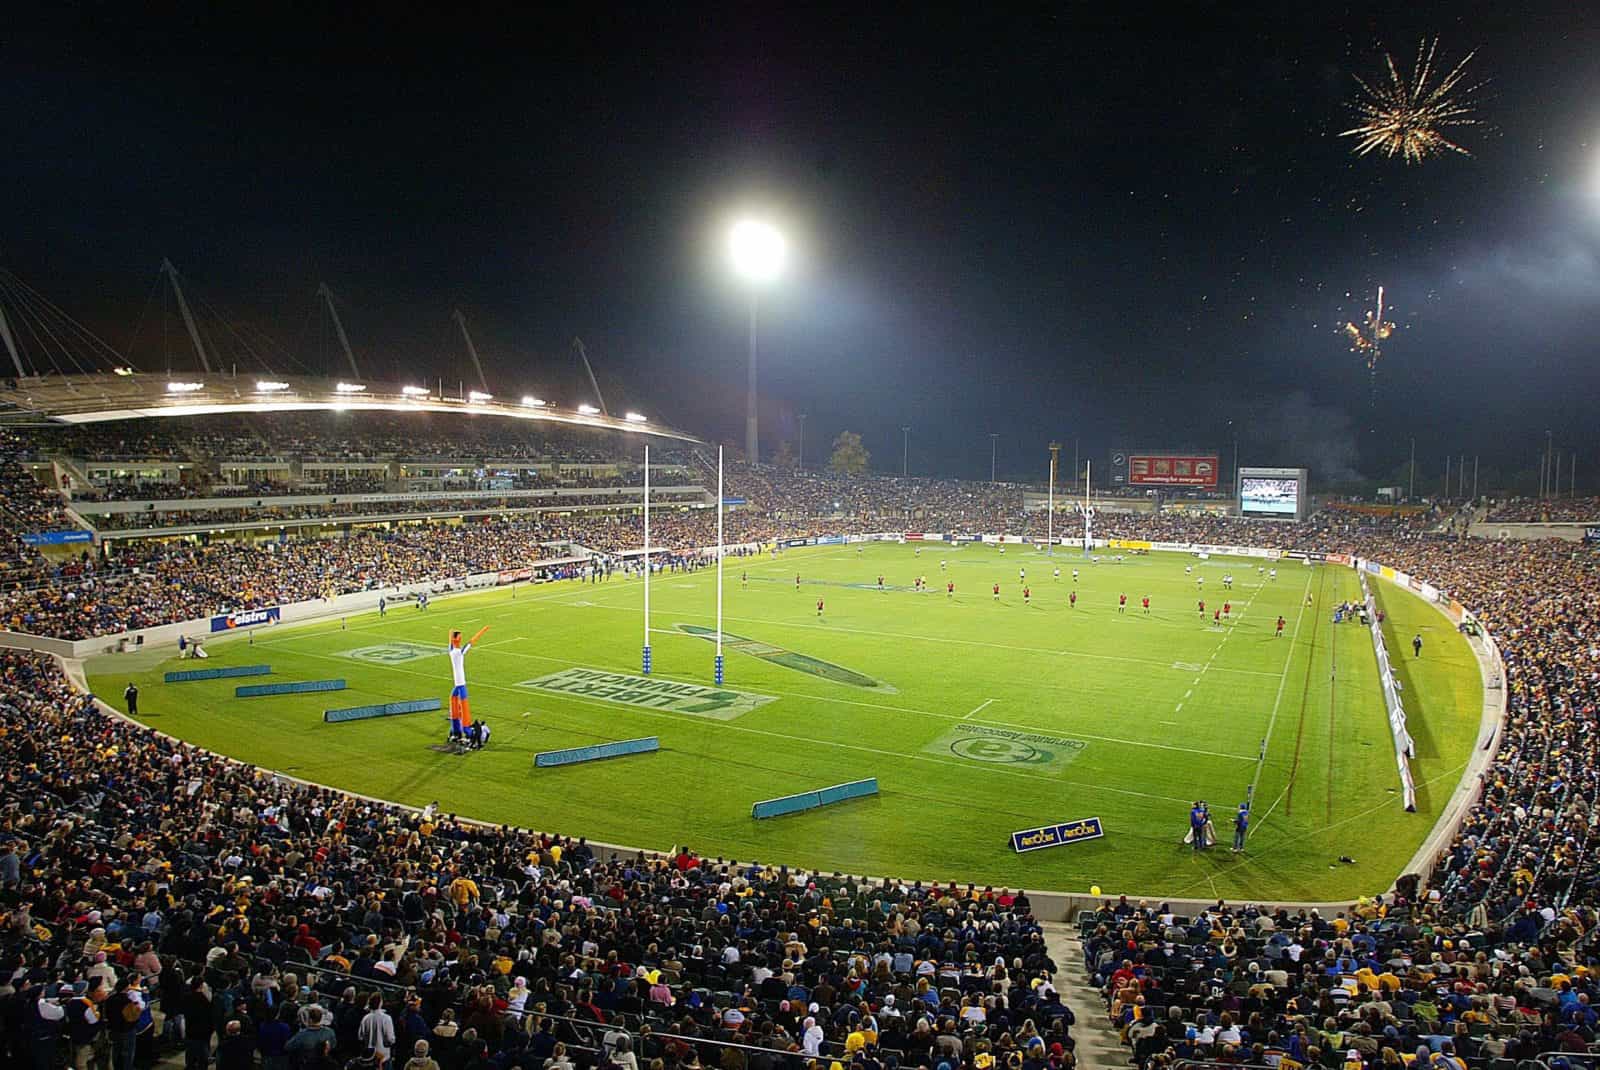 A packed stadium at night